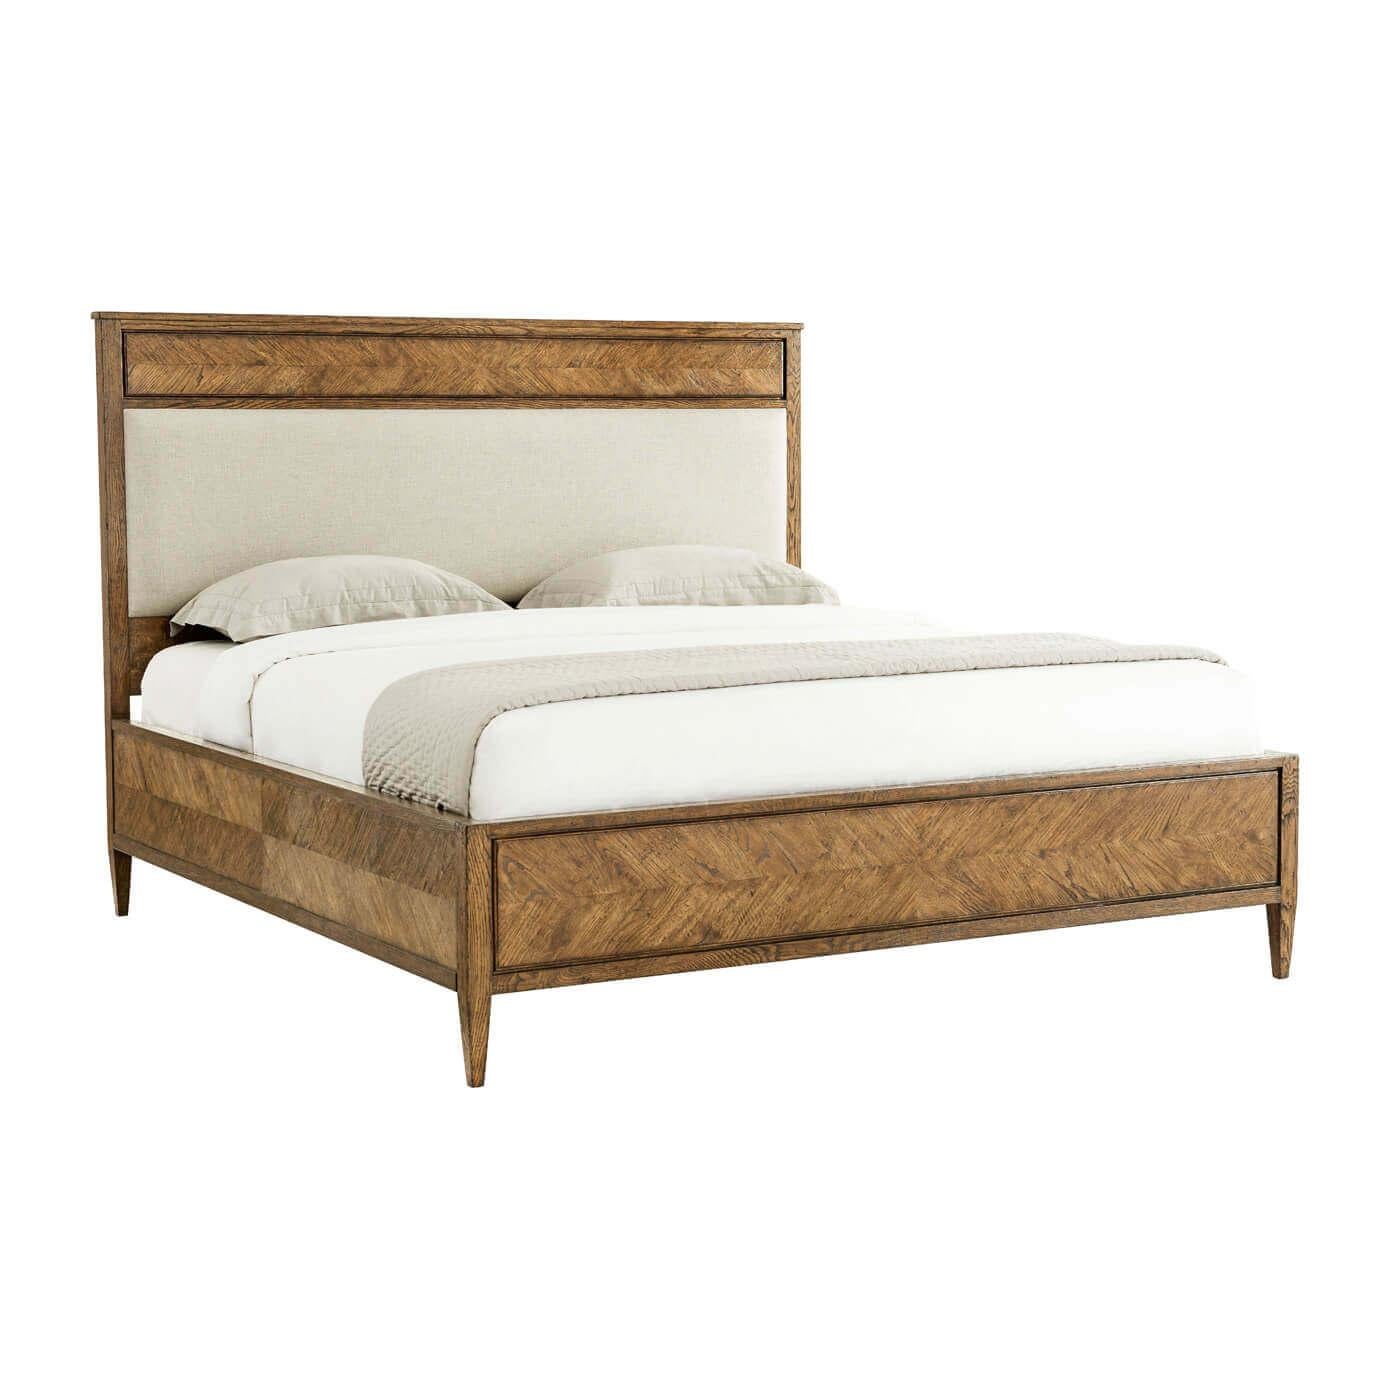 A Herringbone parquetry king bed crafted from rustic light oak. This beautiful bed has a hand-carved starburst design. It has a classic silhouette with an upholstered panel headboard with a framed oak side rail and tapered finish leg. 
Shown in